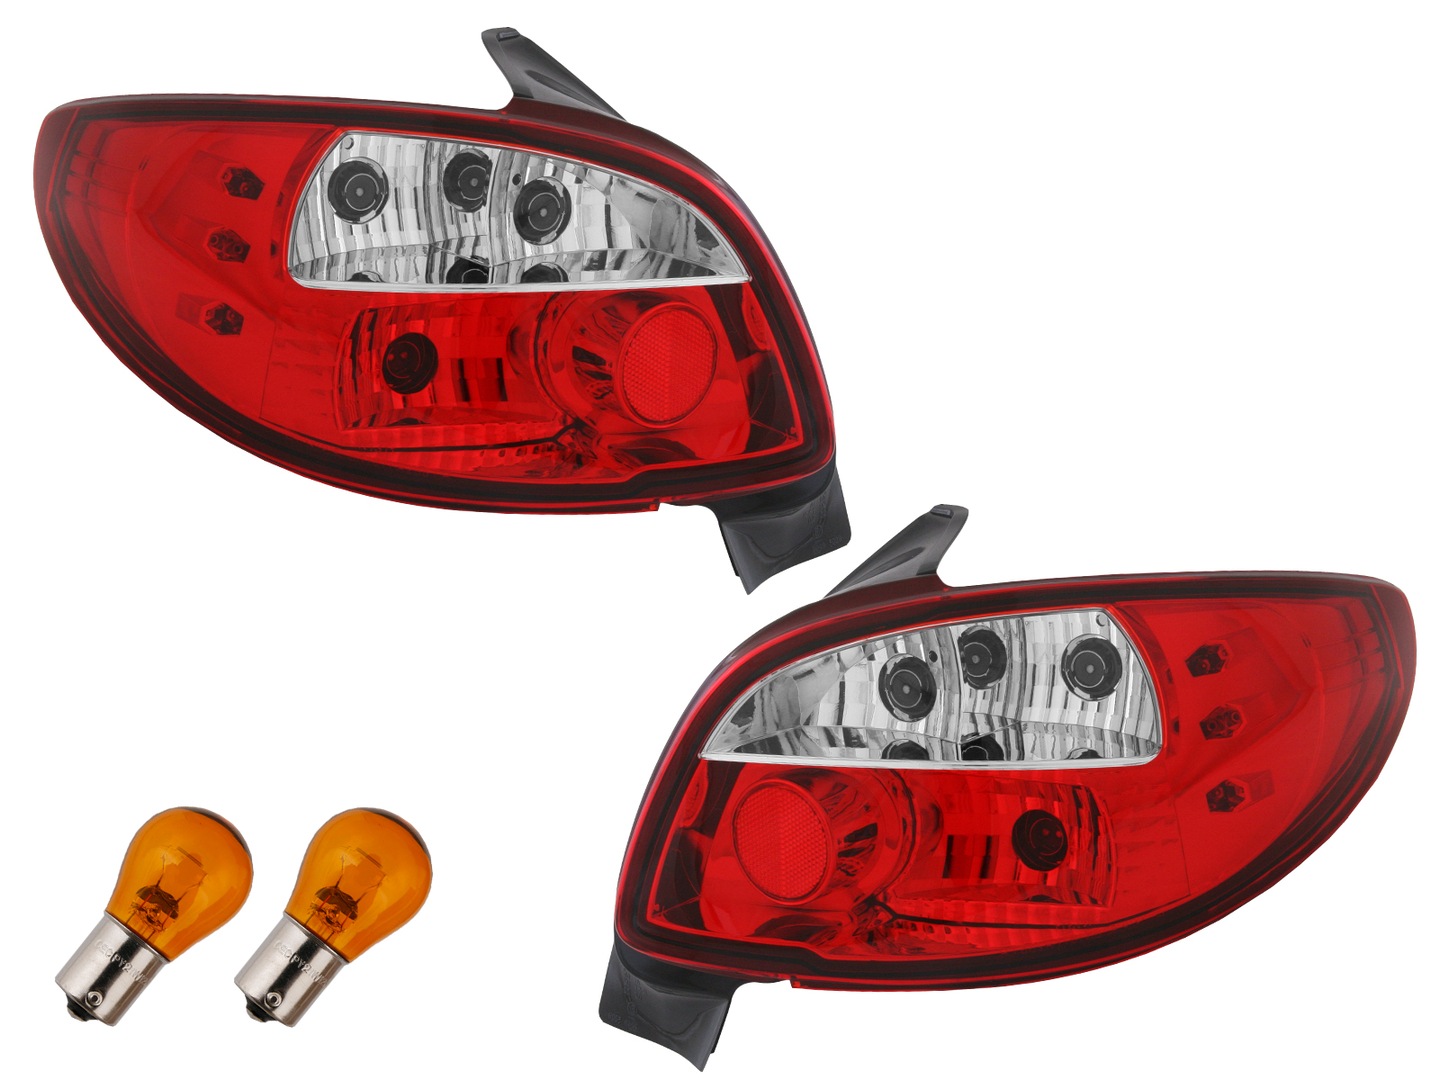 LAMPA TYL KPL PEUGEOT 206 1998 CLEAR RED TUNING